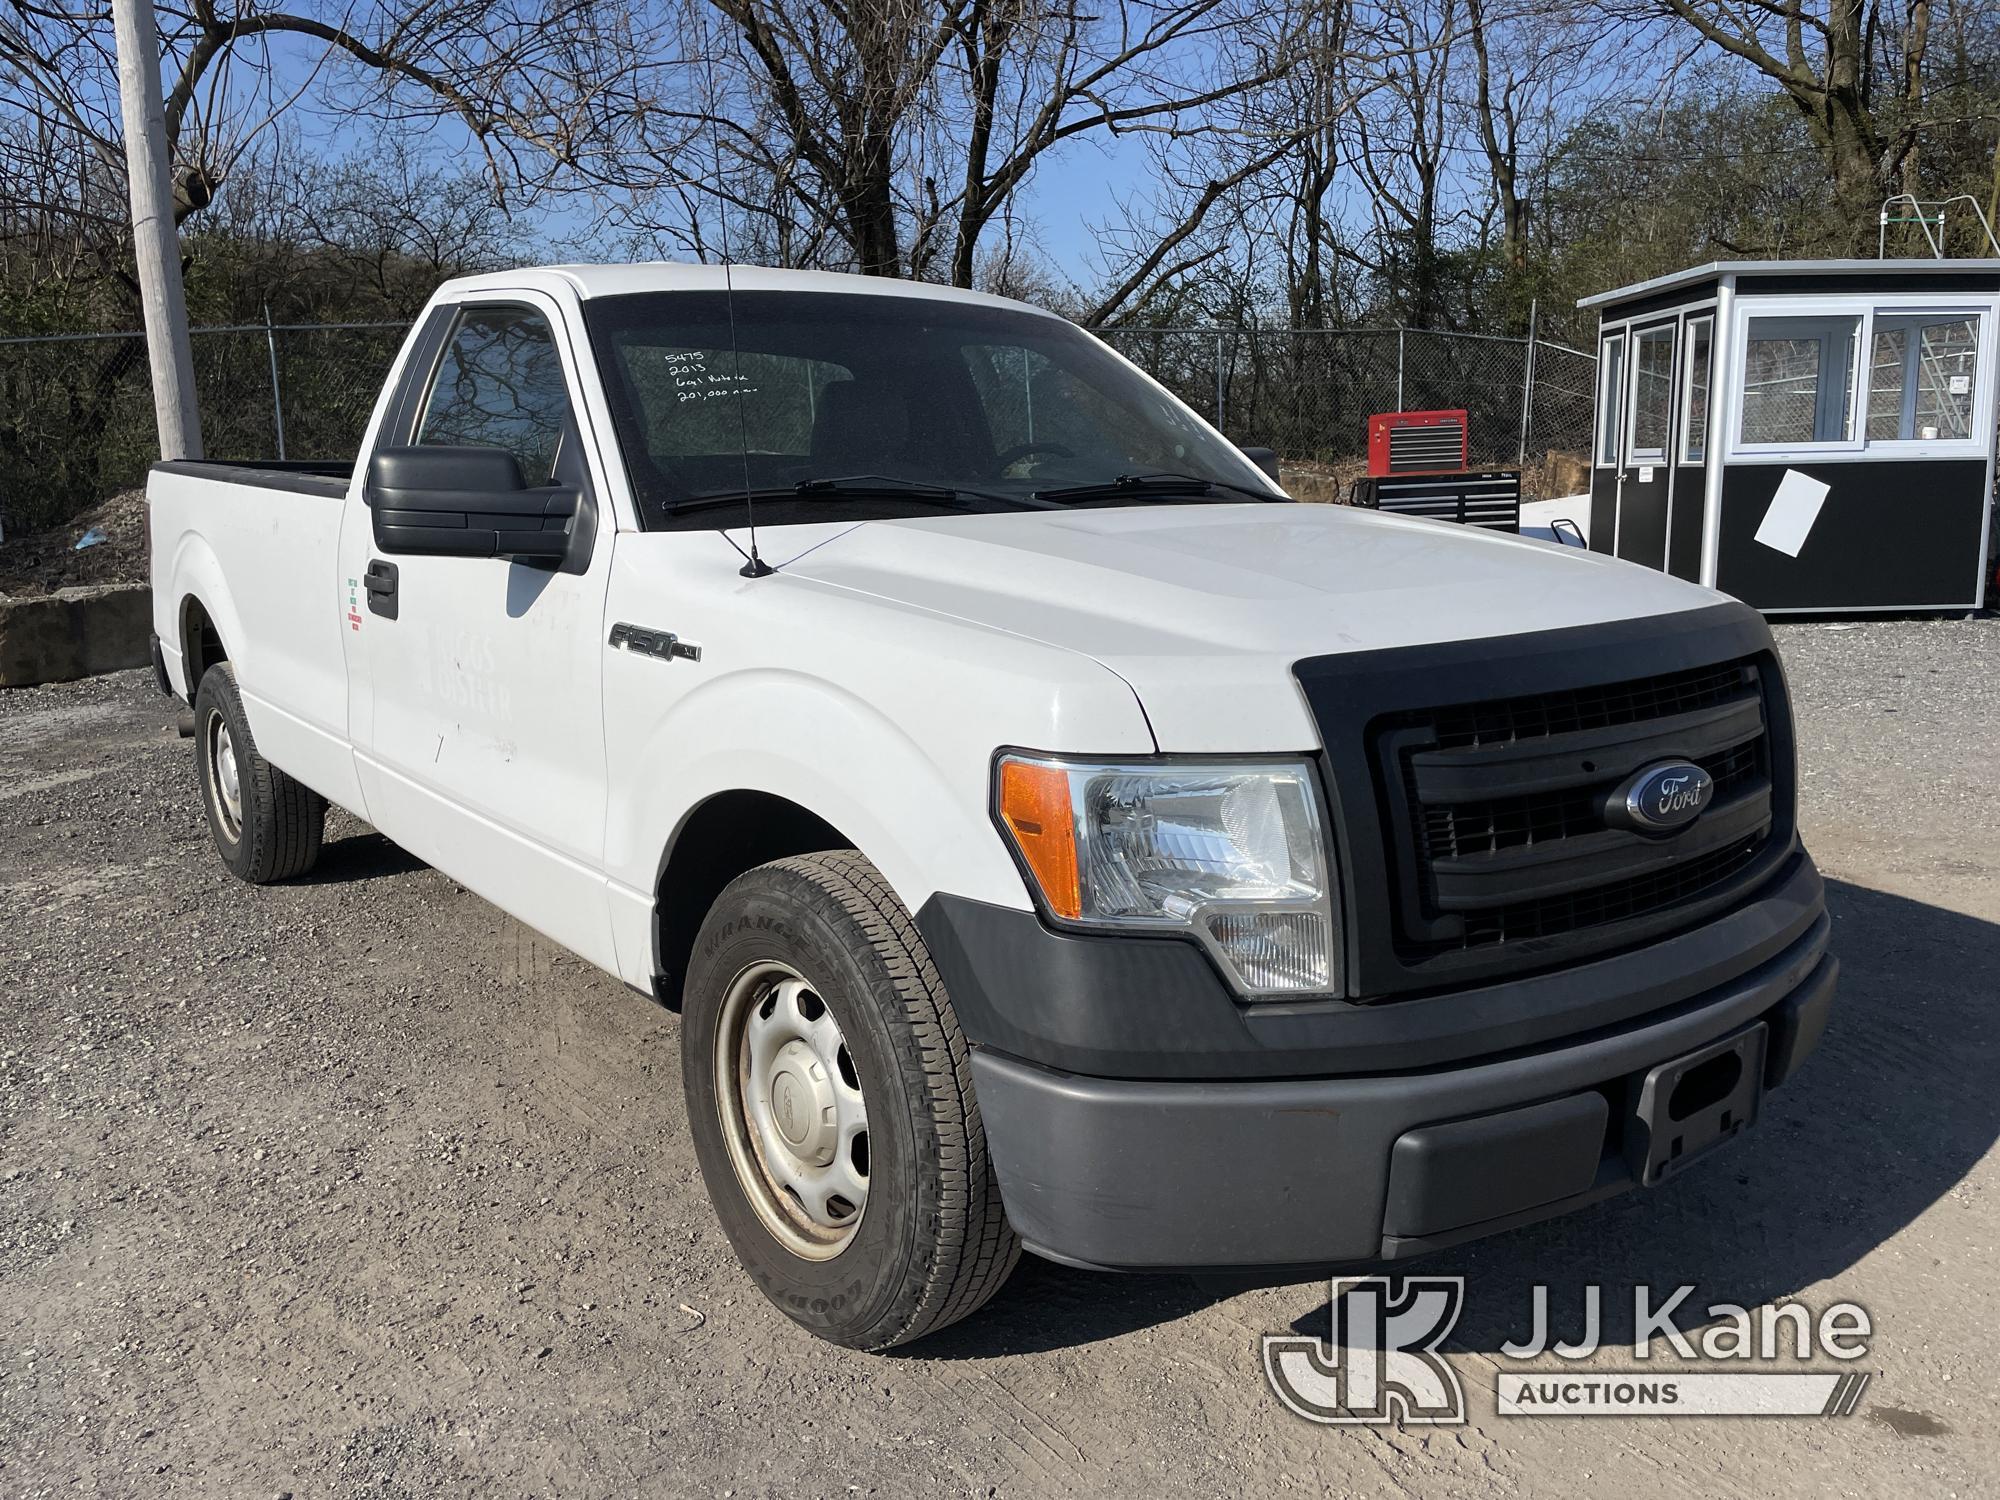 (Plymouth Meeting, PA) 2013 Ford F150 Pickup Truck Runs & Moves, Power Steering Issues, Body & Rust